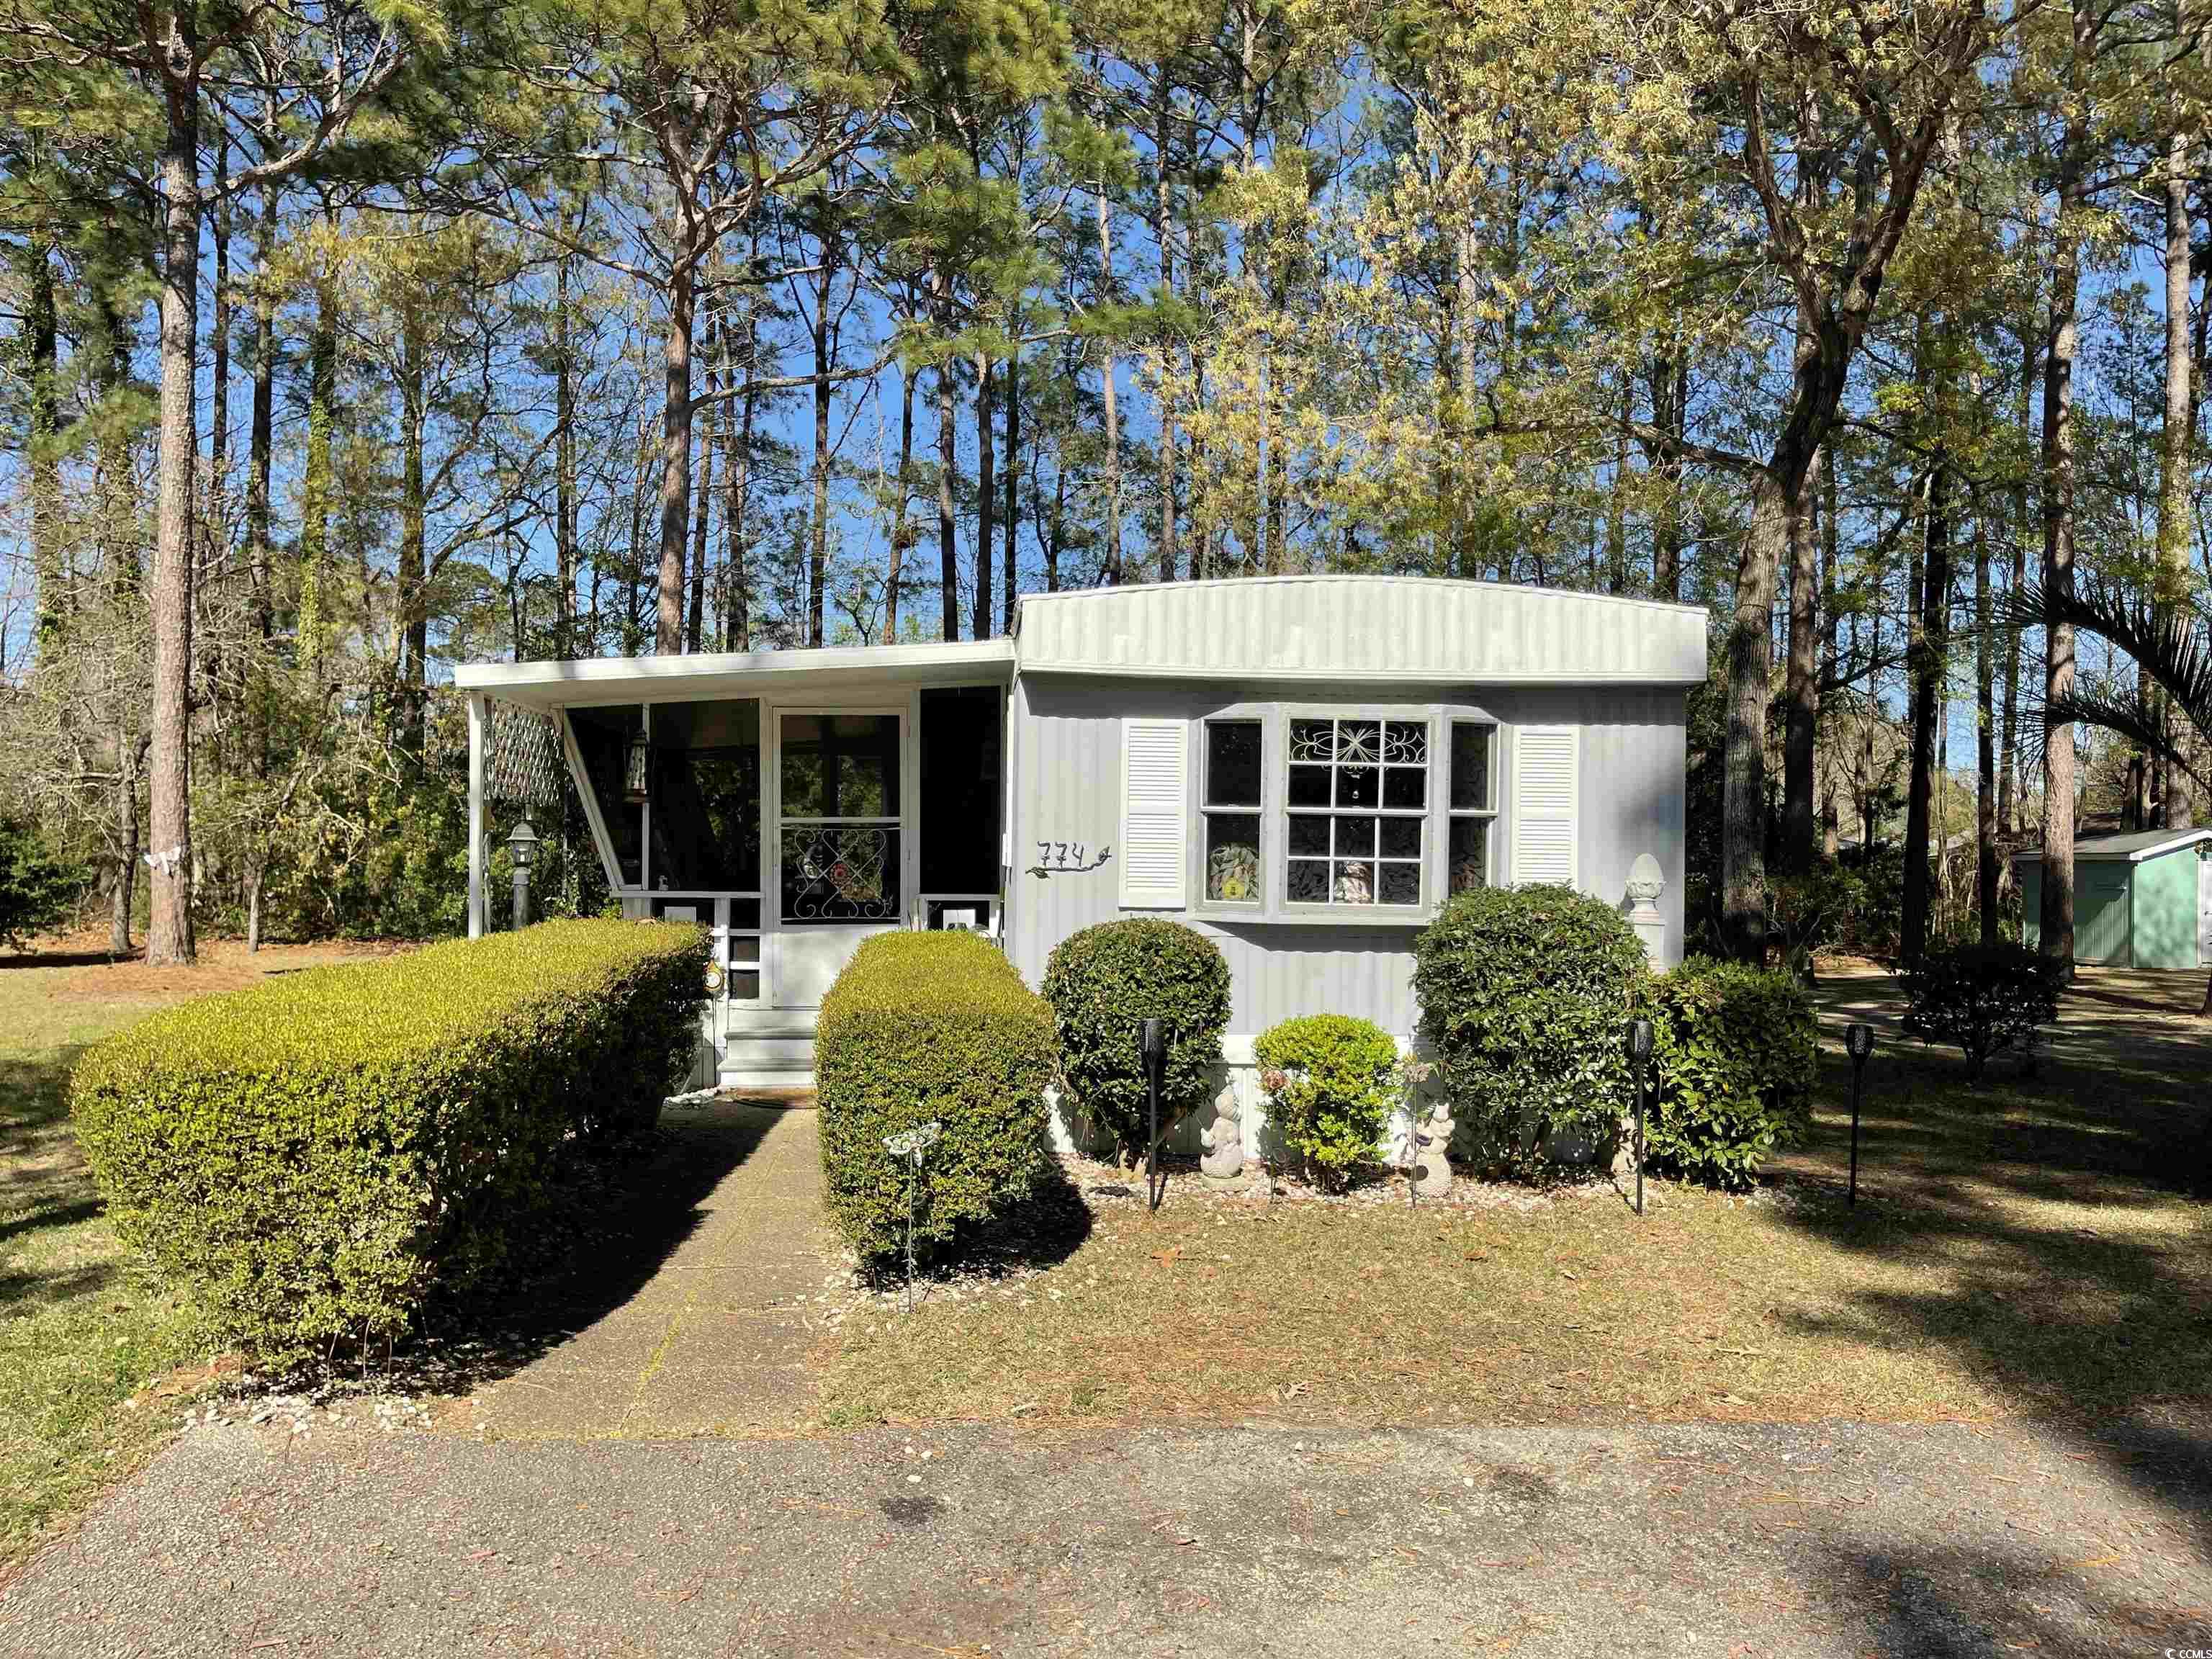 check out this cute, well-maintained, freshly painted two bedroom one bath home located in the beautiful ocean pines community! this unique home bumps out to 16ft wide the last 22 ft, for a bigger 2nd bedroom, bathroom, and nice size master bedroom (plenty of room for a king size bed) with a walk in closet. the home boasts a beautiful 8 x 16 screened in porch to relax and enjoy the beautiful summer evenings, a  small 6 x 8 open air side porch, the home sits on a big lot with plenty of room between you and your neighbors. ocean pines is an active over 55 community! enjoy the friendliness of the neighbors and all the community has to offer, two community pools, two clubhouses, activities scheduled throughout the year! this location is perfect, golf cart, ride to the beach, close to shopping, supermarkets, restaurants, golf, garden city pier, brooke green gardens, murrells, inlet, marsh, walk! this one is a beauty stop in and see !